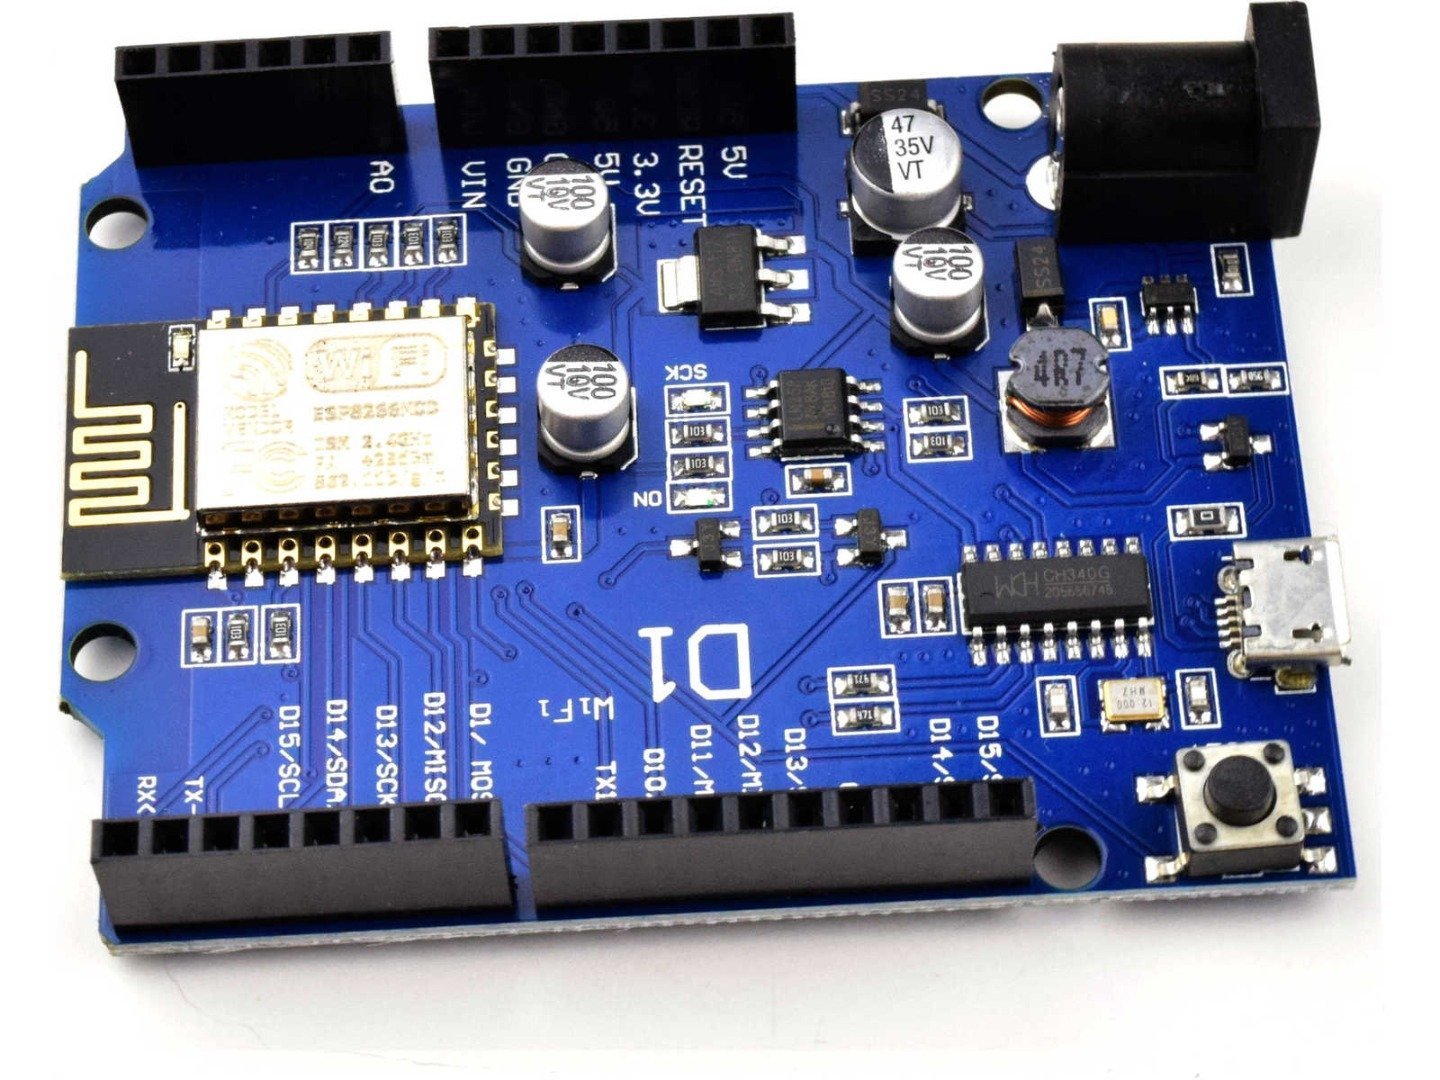 WEMOS D1 ESP8266 Wi-Fi Board 80-160MHz – IoT – compatible with Arduino and NodeMCU 8